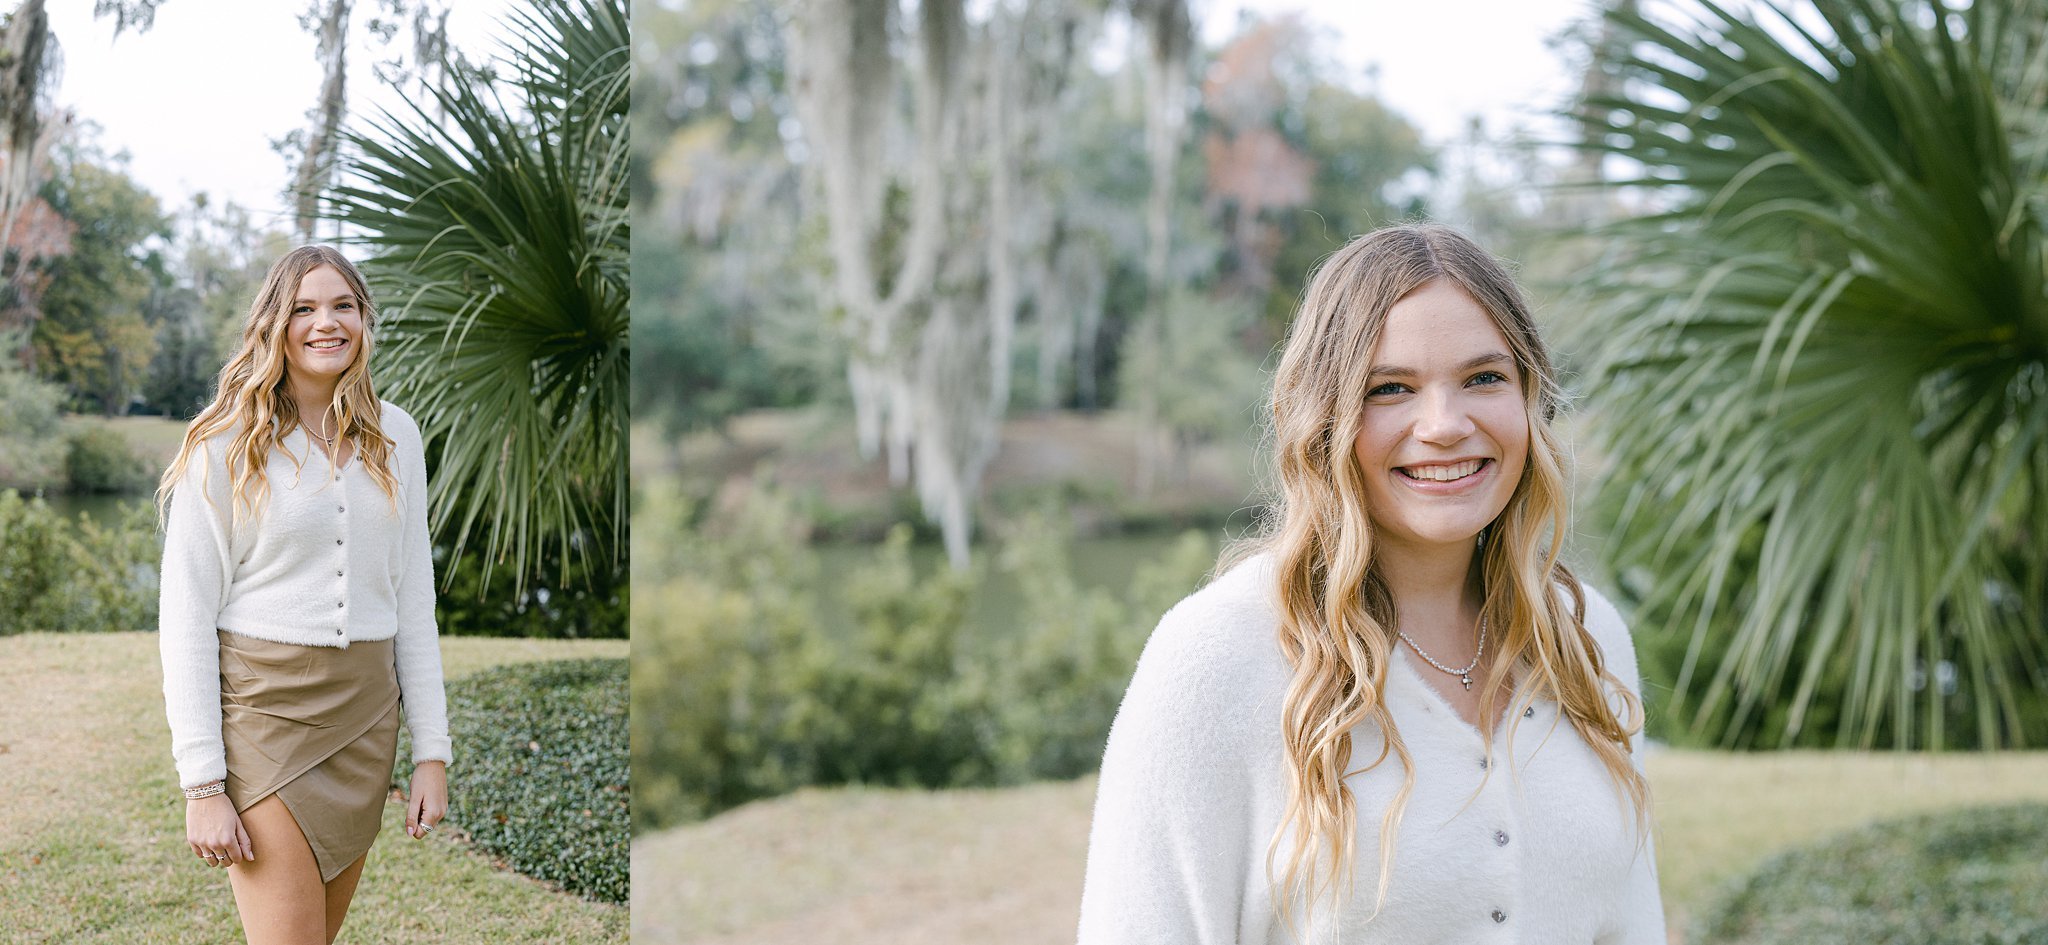 Katherine_Ives_Photography_Timmerman_Family_palmetto_bluff_35979.JPG